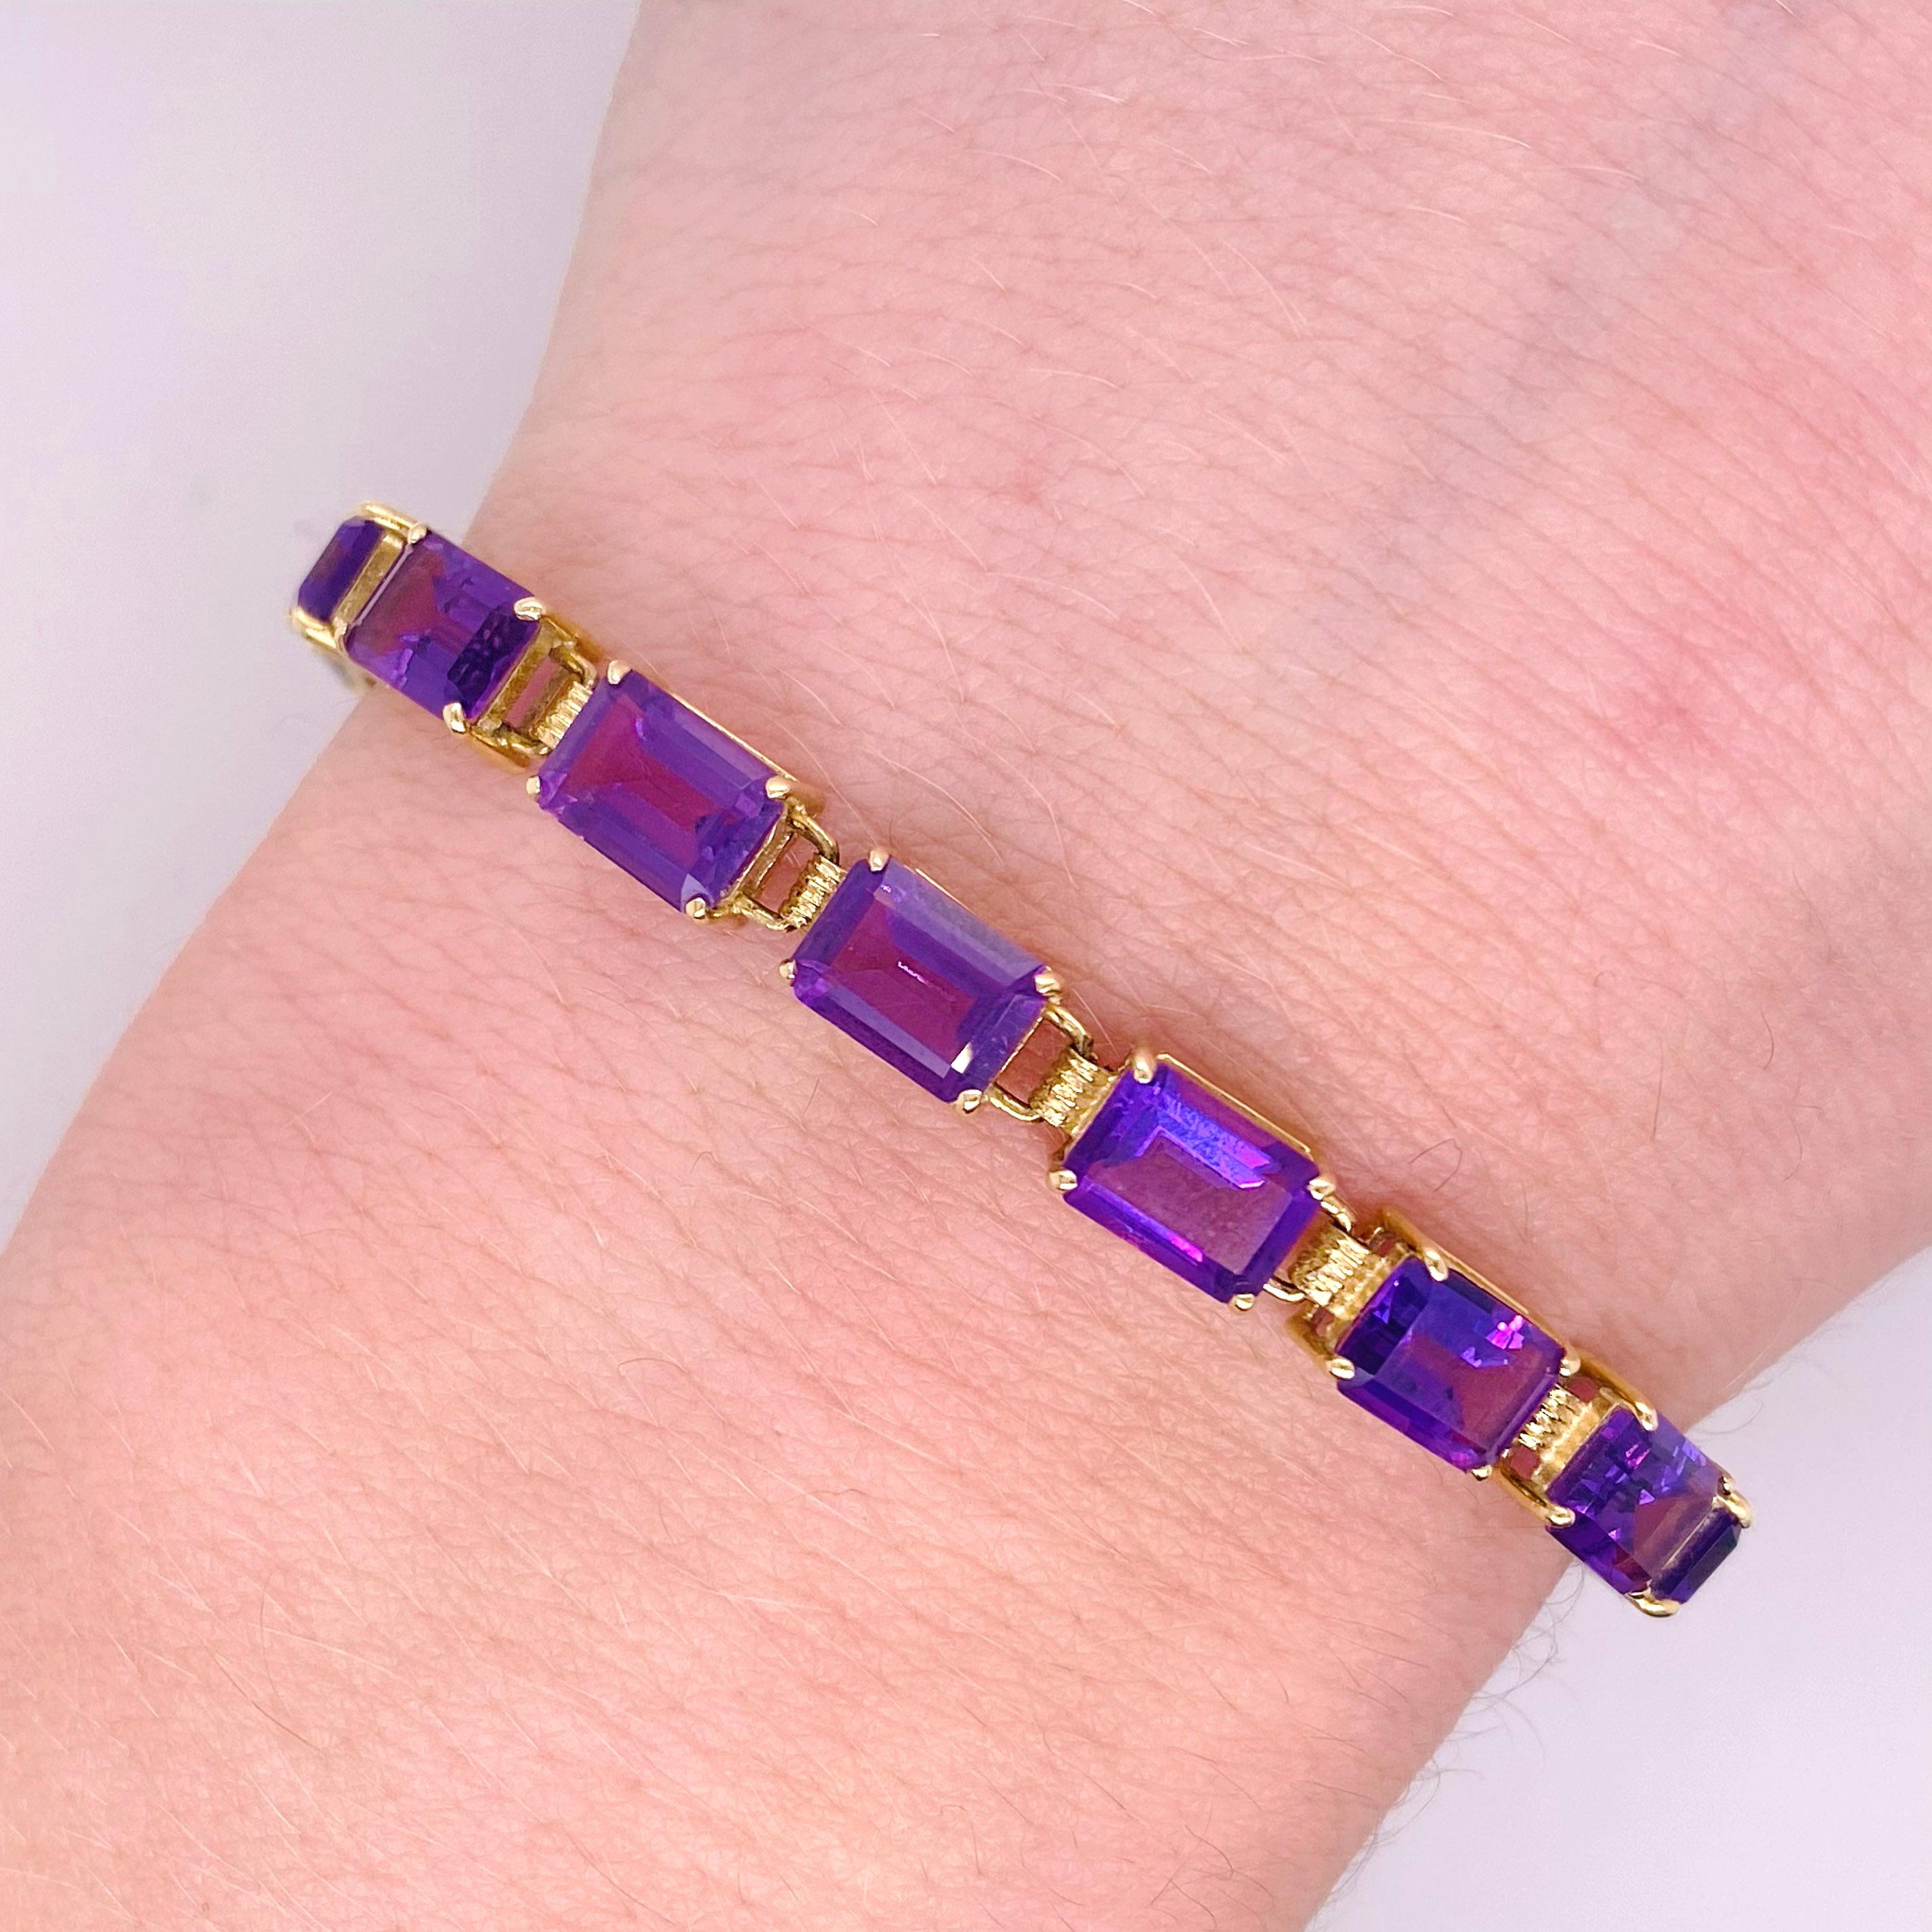 The 5.00 carat total weight amethyst tennis bracelet is handcrafted in 14 karat yellow gold.  The gemstones are nice and large and made from four prong baskets that have been skillfully assembled to each other .The bracelet is 7 inches long and fits